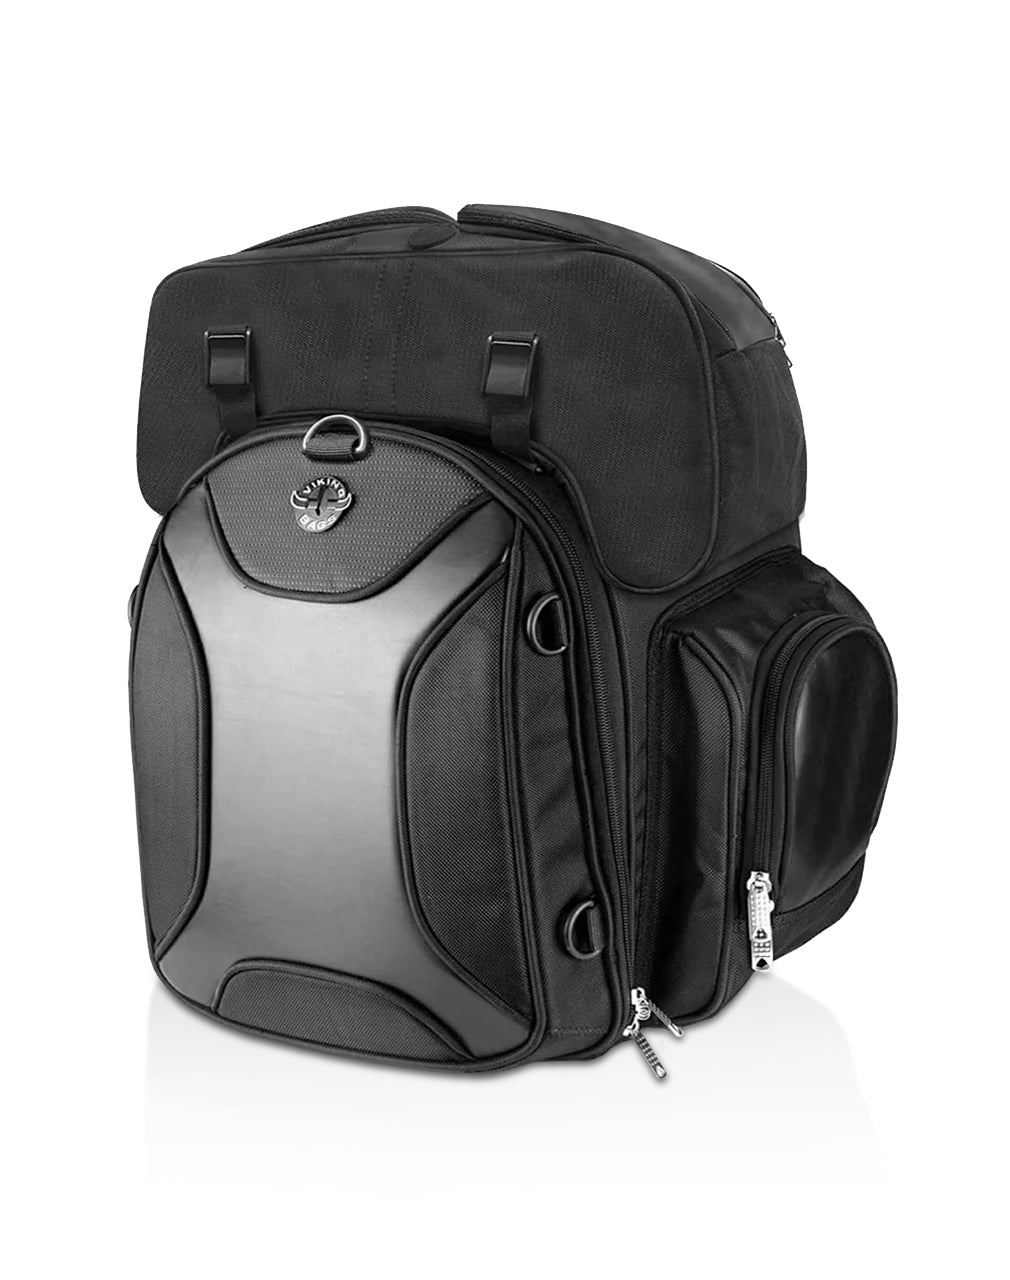 35L - Dagr Extra Large Hysoung Motorcycle Tail Bag